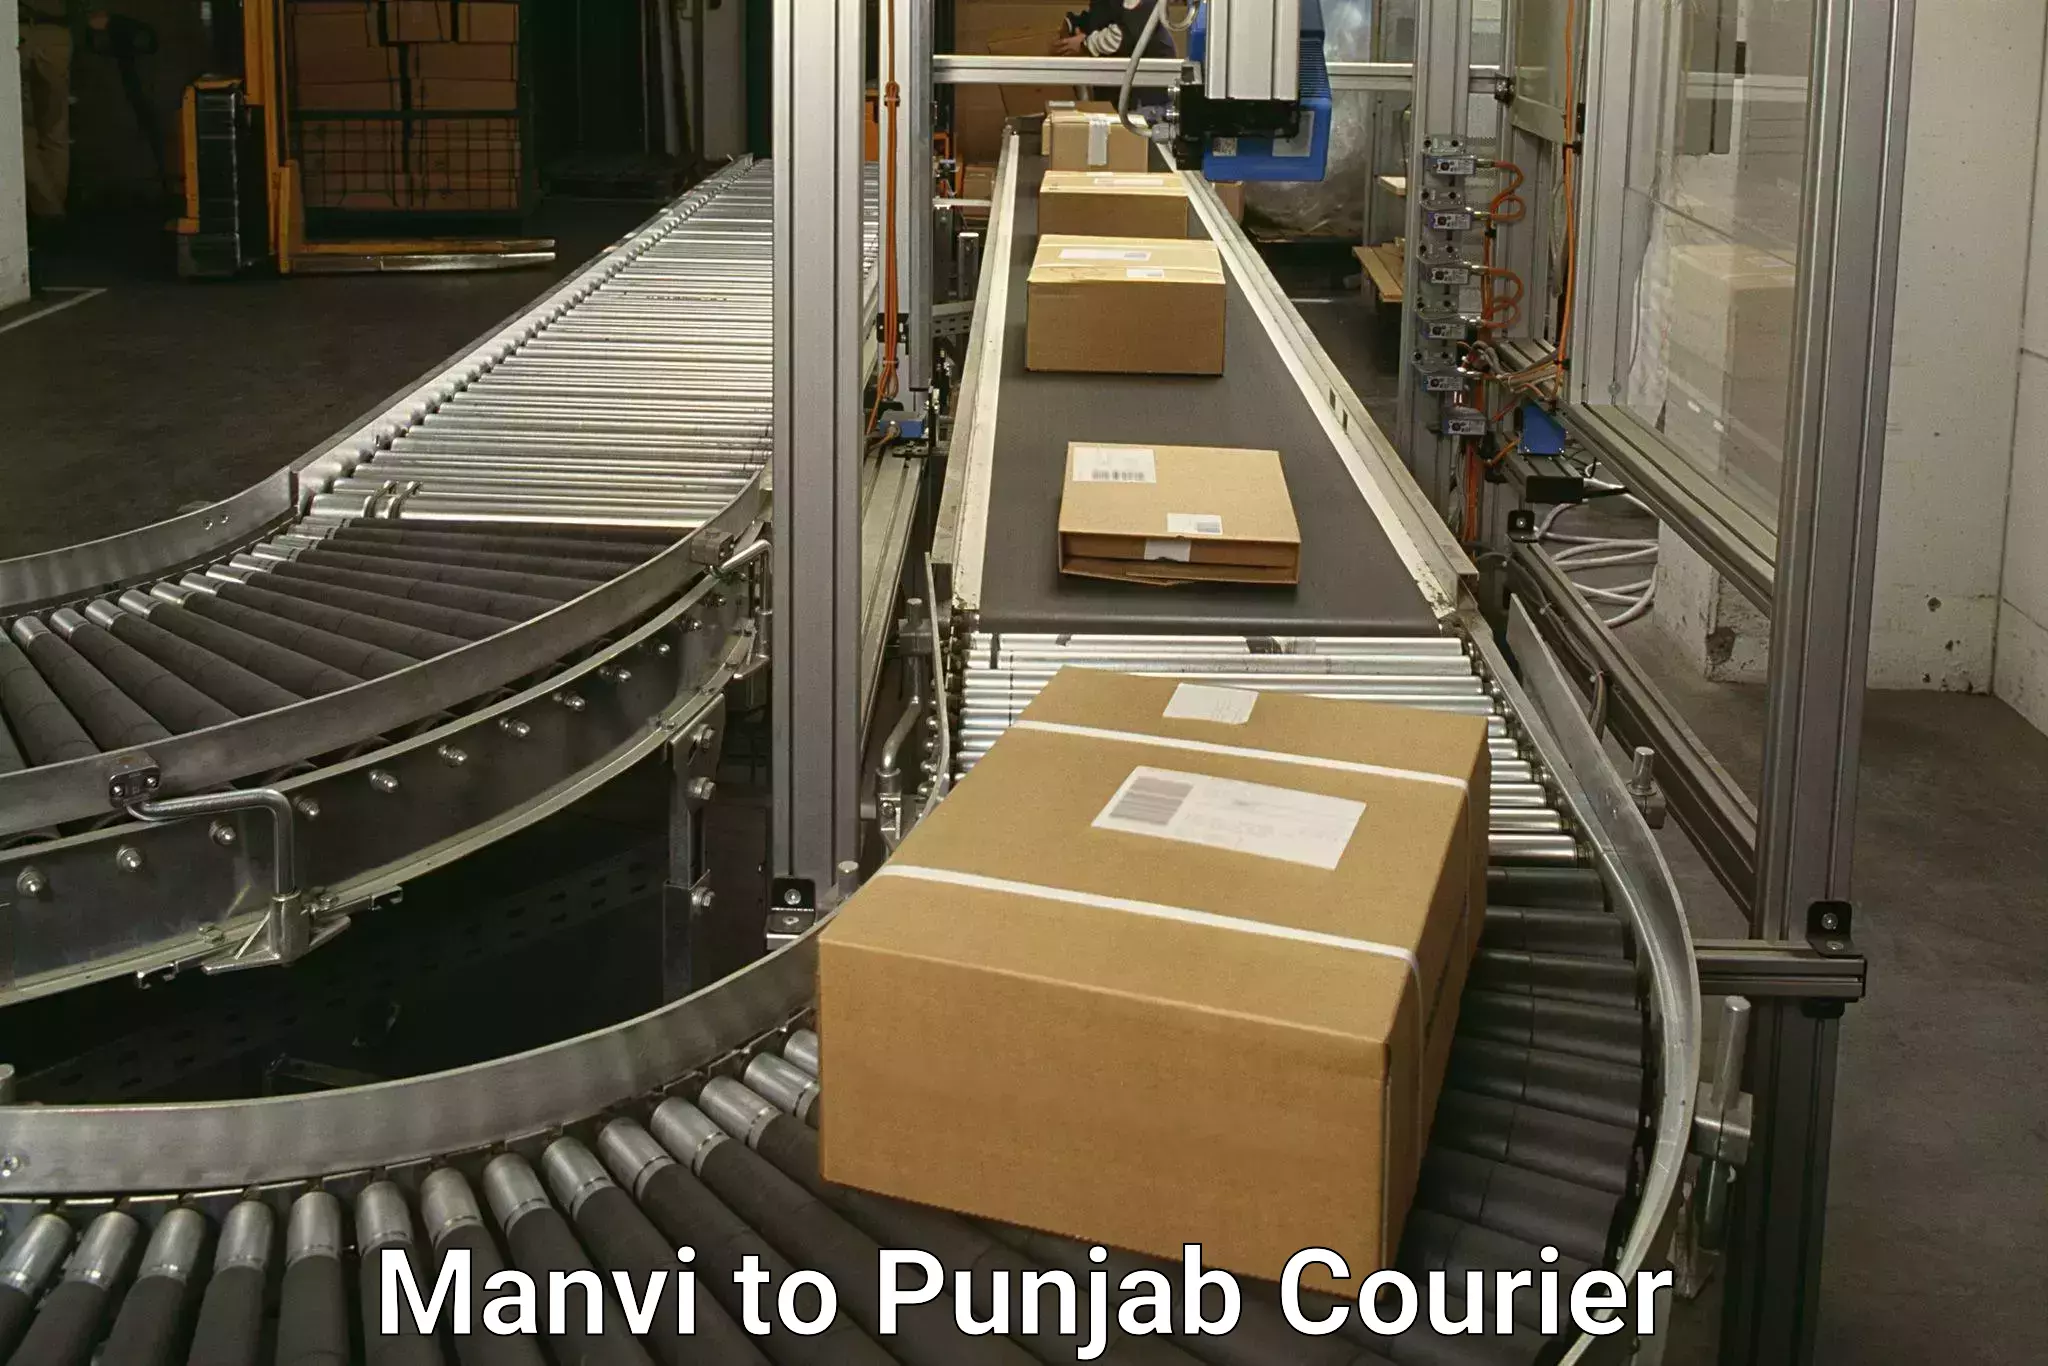 Express delivery capabilities Manvi to Punjab